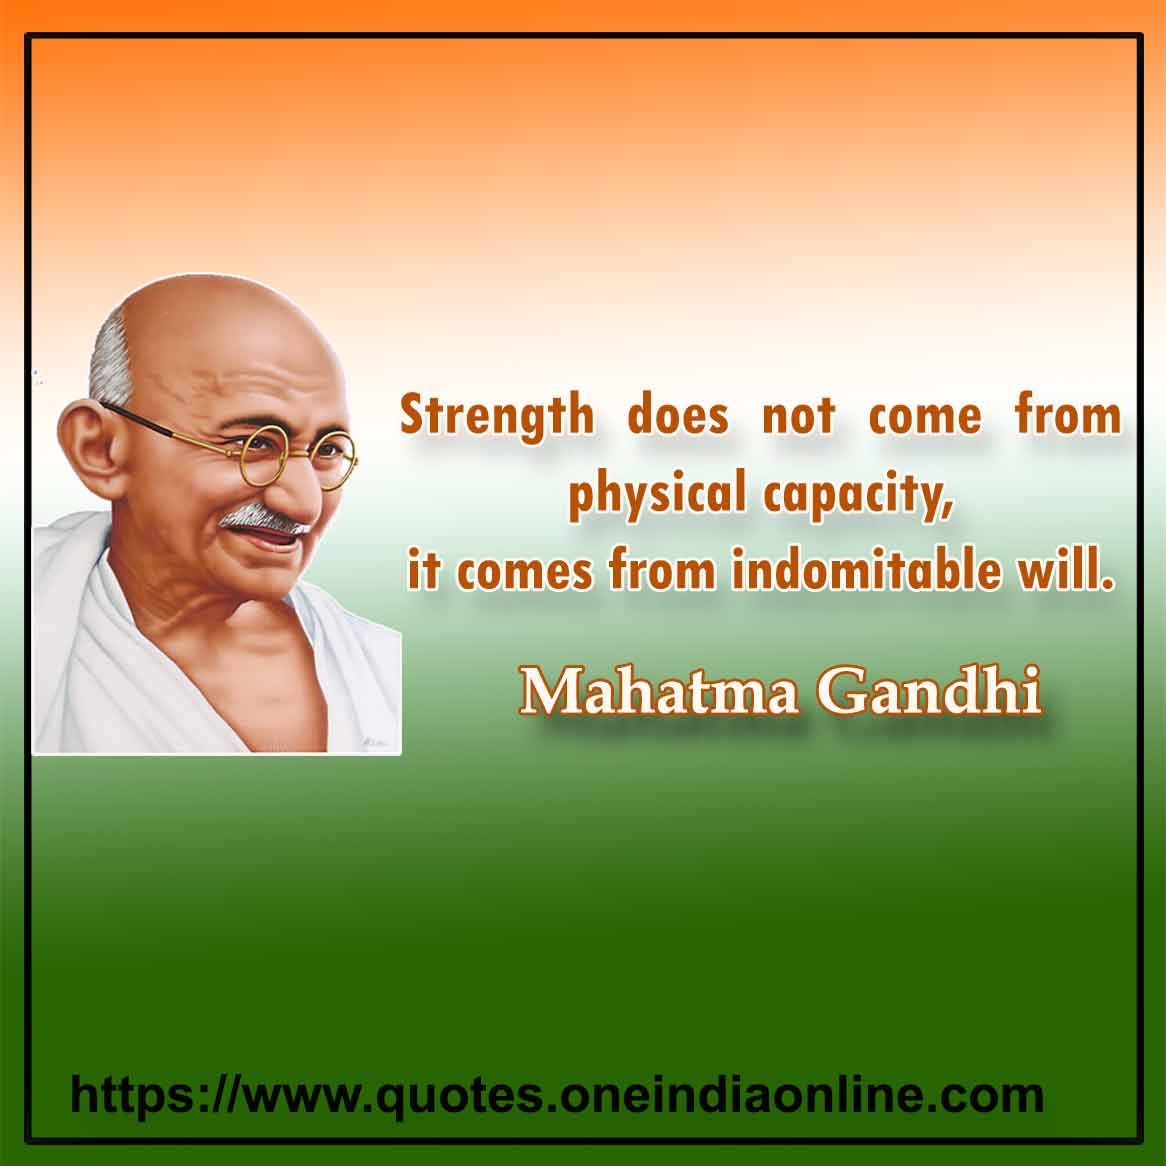 Strength does not come from physical capacity, it comes from indomitable will.